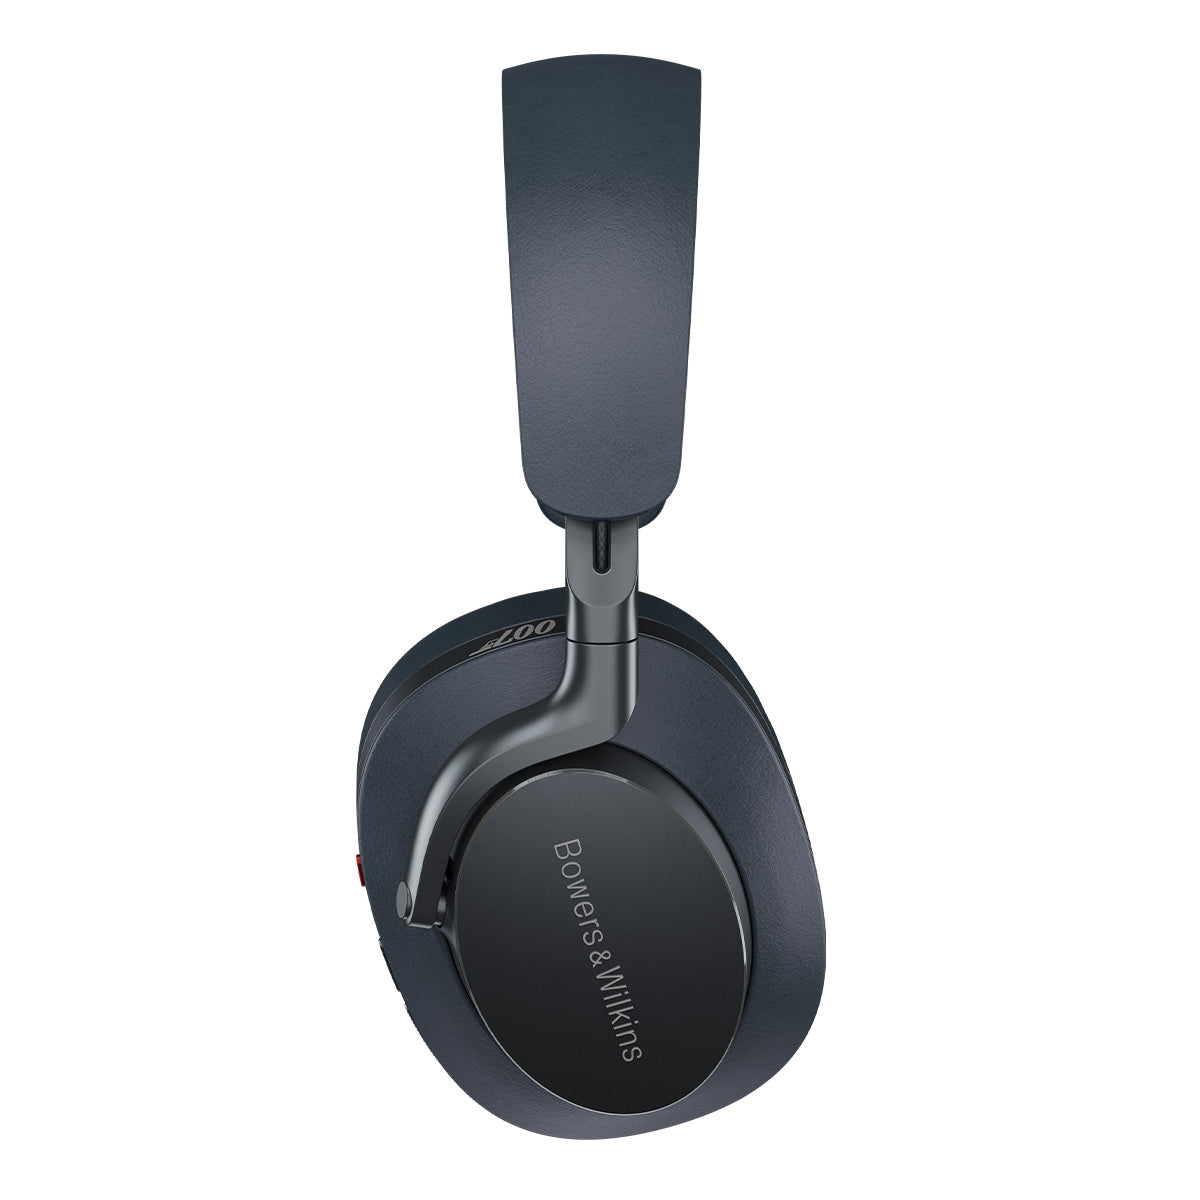 Bowers & Wilkins Px8 007 Special Edition James Bond Bluetooth Over-Ear Headphones with Active Noise Cancellation (Midnight Blue)